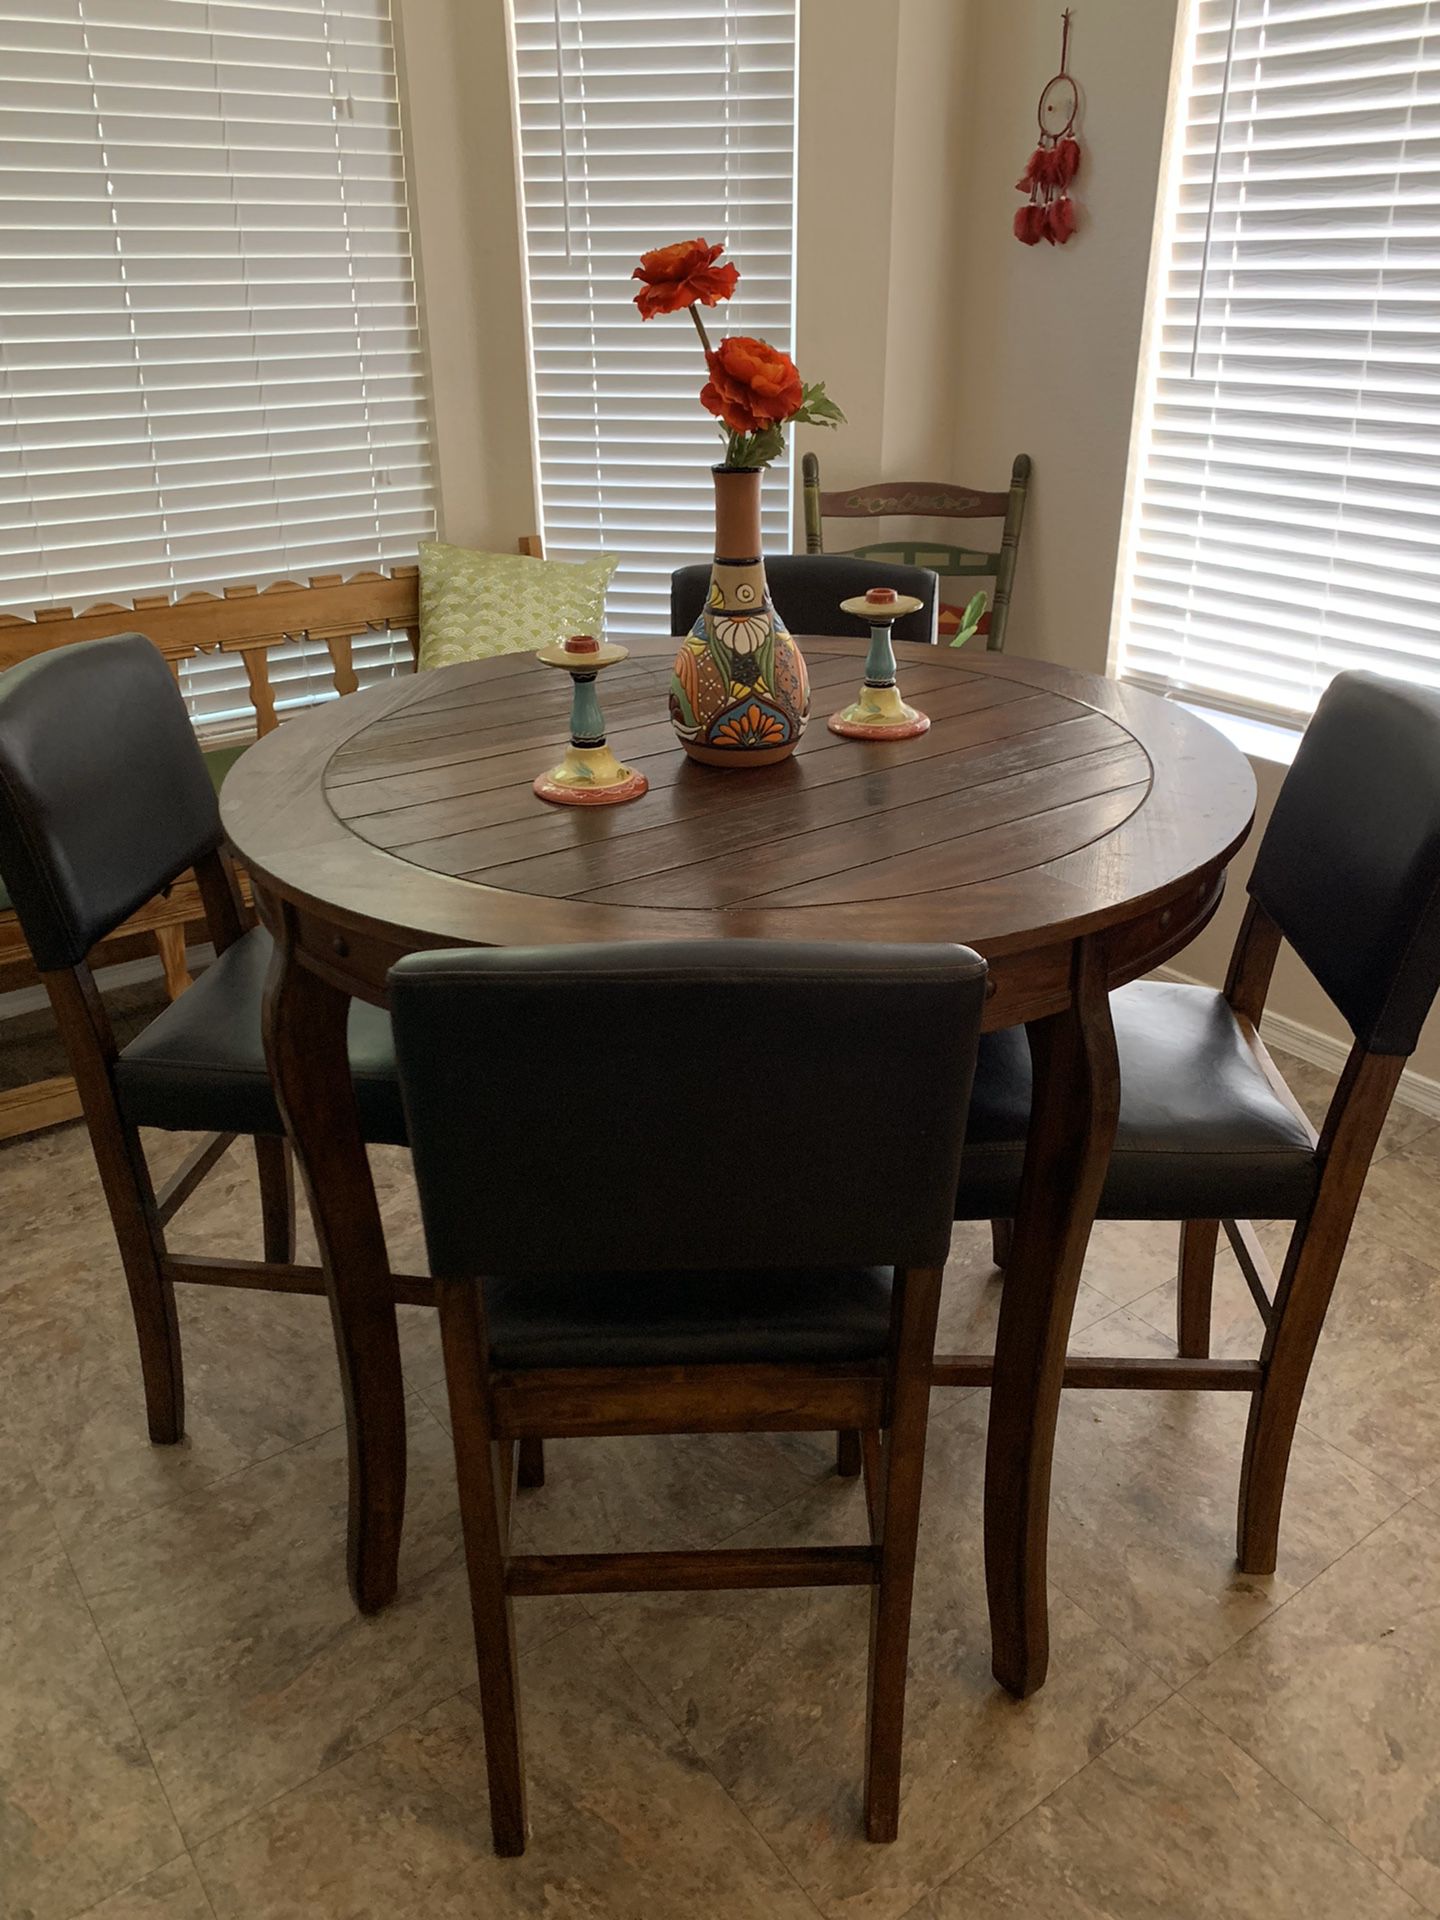 Wooden elevated kitchen table and 4 chairs